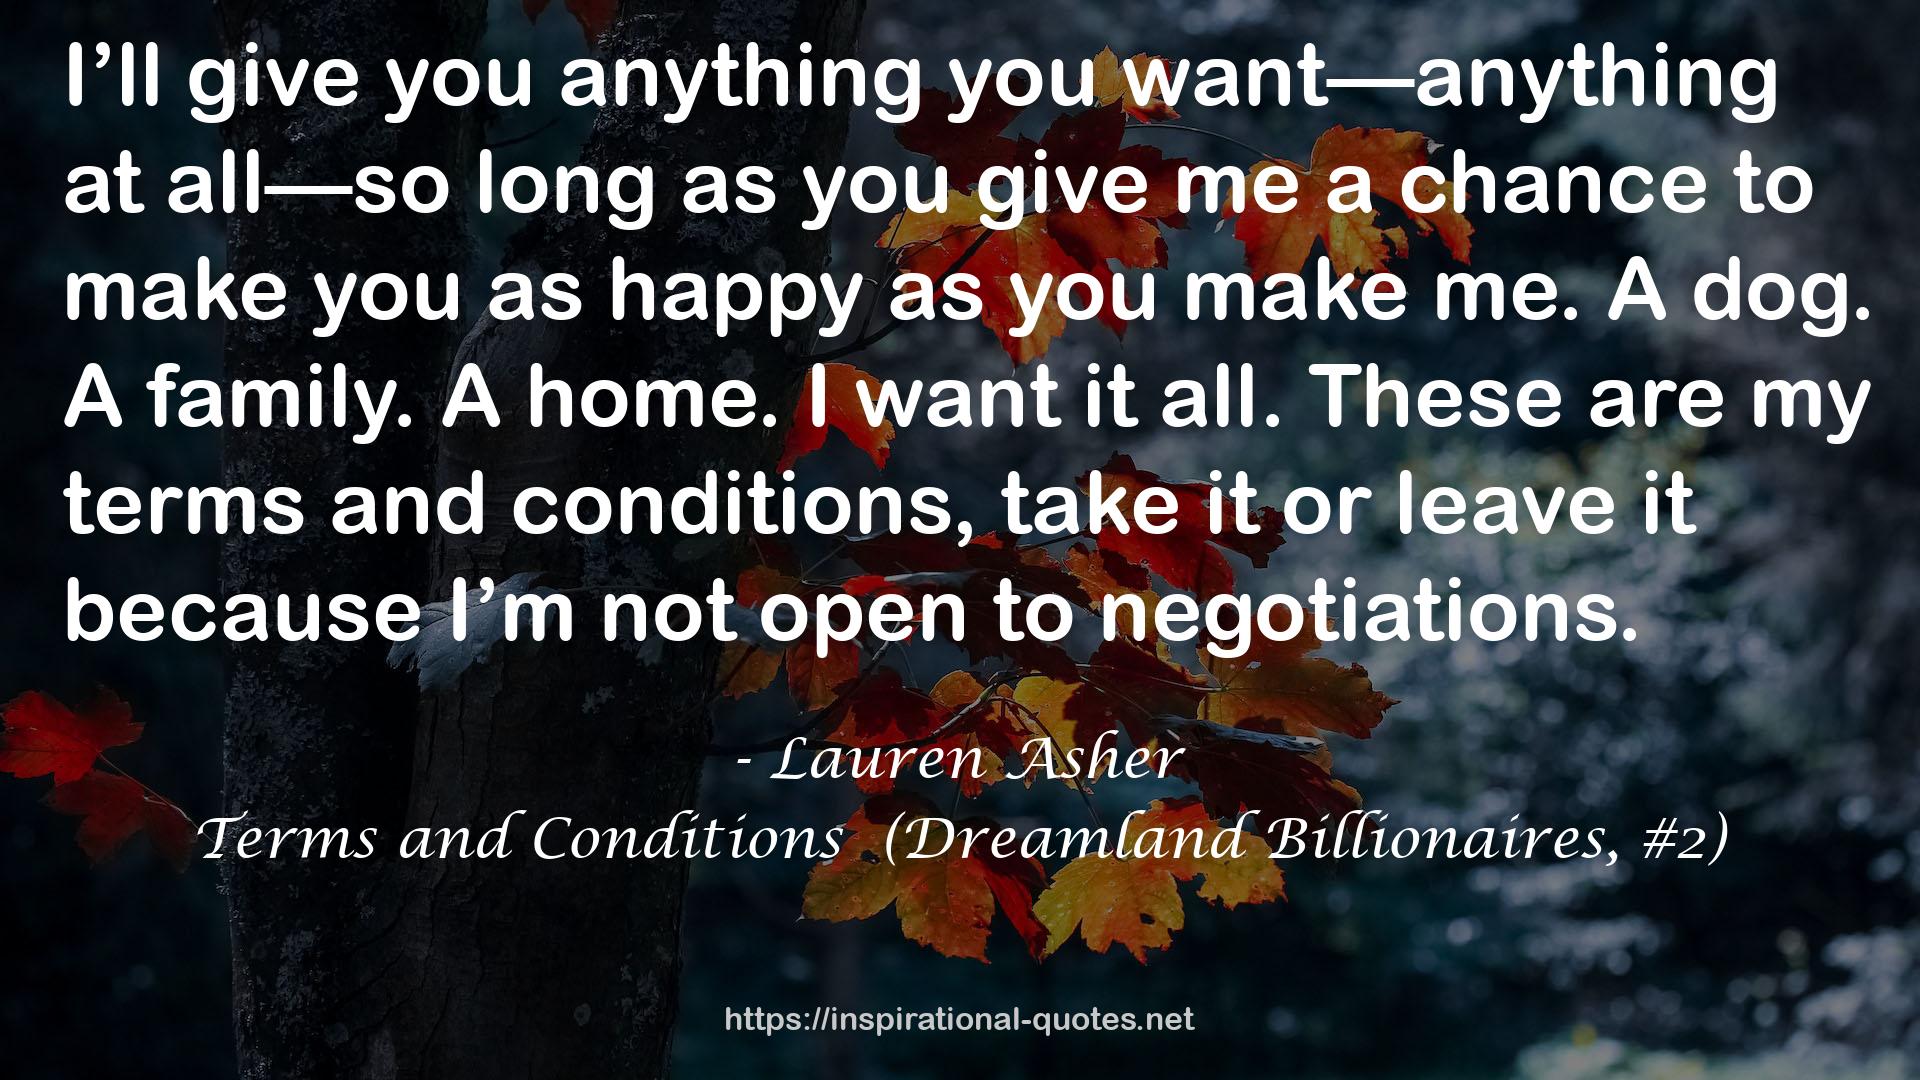 Terms and Conditions  (Dreamland Billionaires, #2) QUOTES